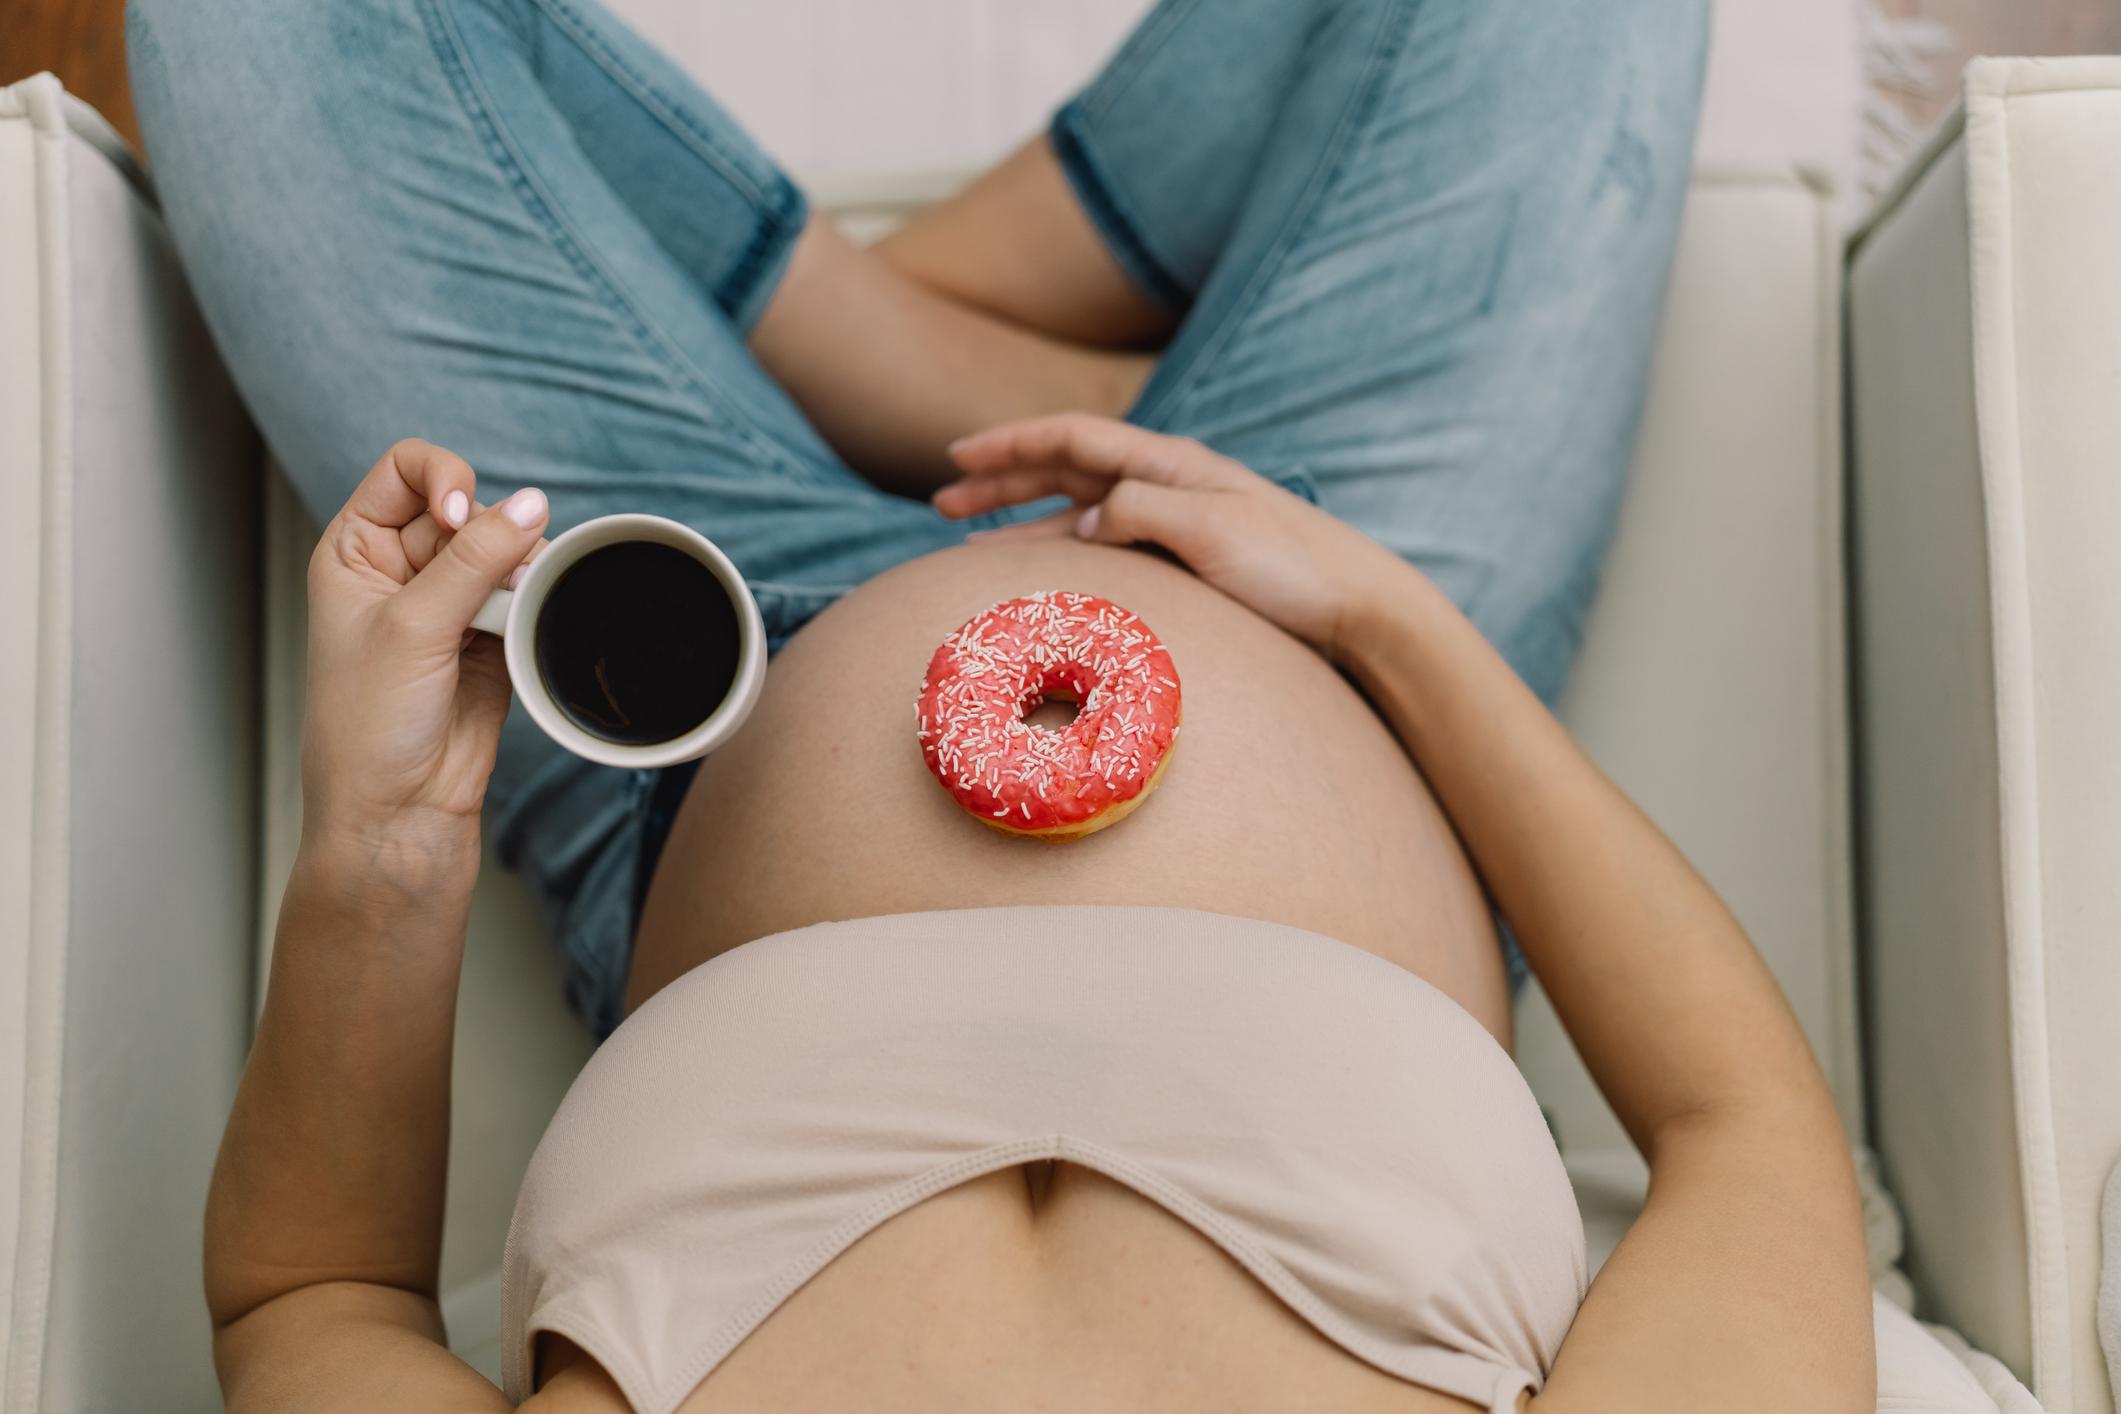 Ultra-processed foods: why should pregnant women avoid them? 